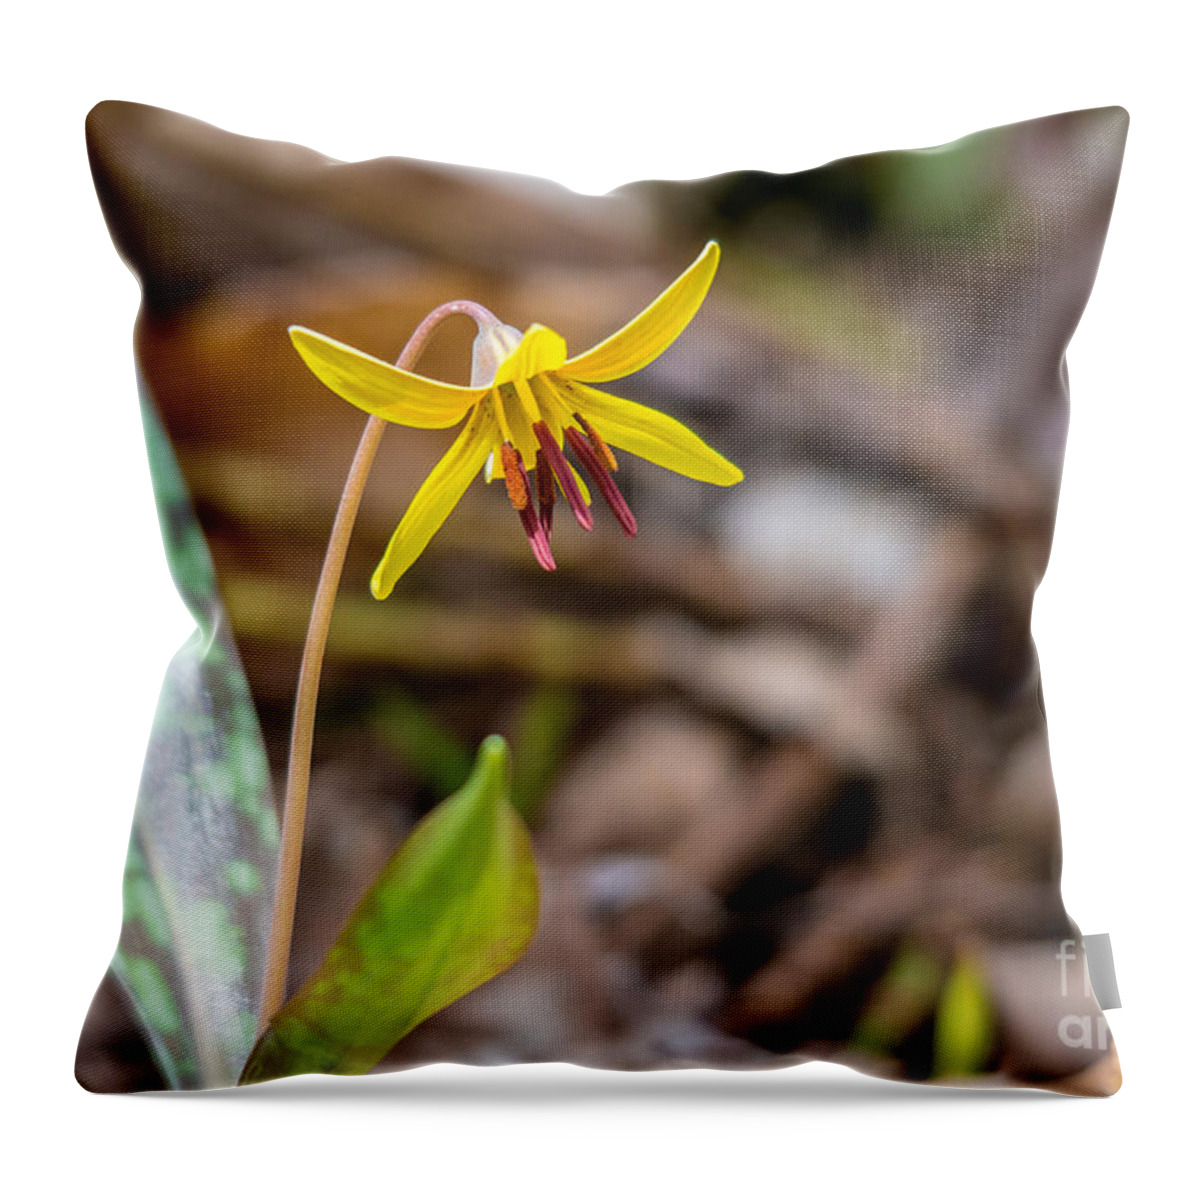 Landscape Throw Pillow featuring the photograph Trout Lily by Cheryl Baxter